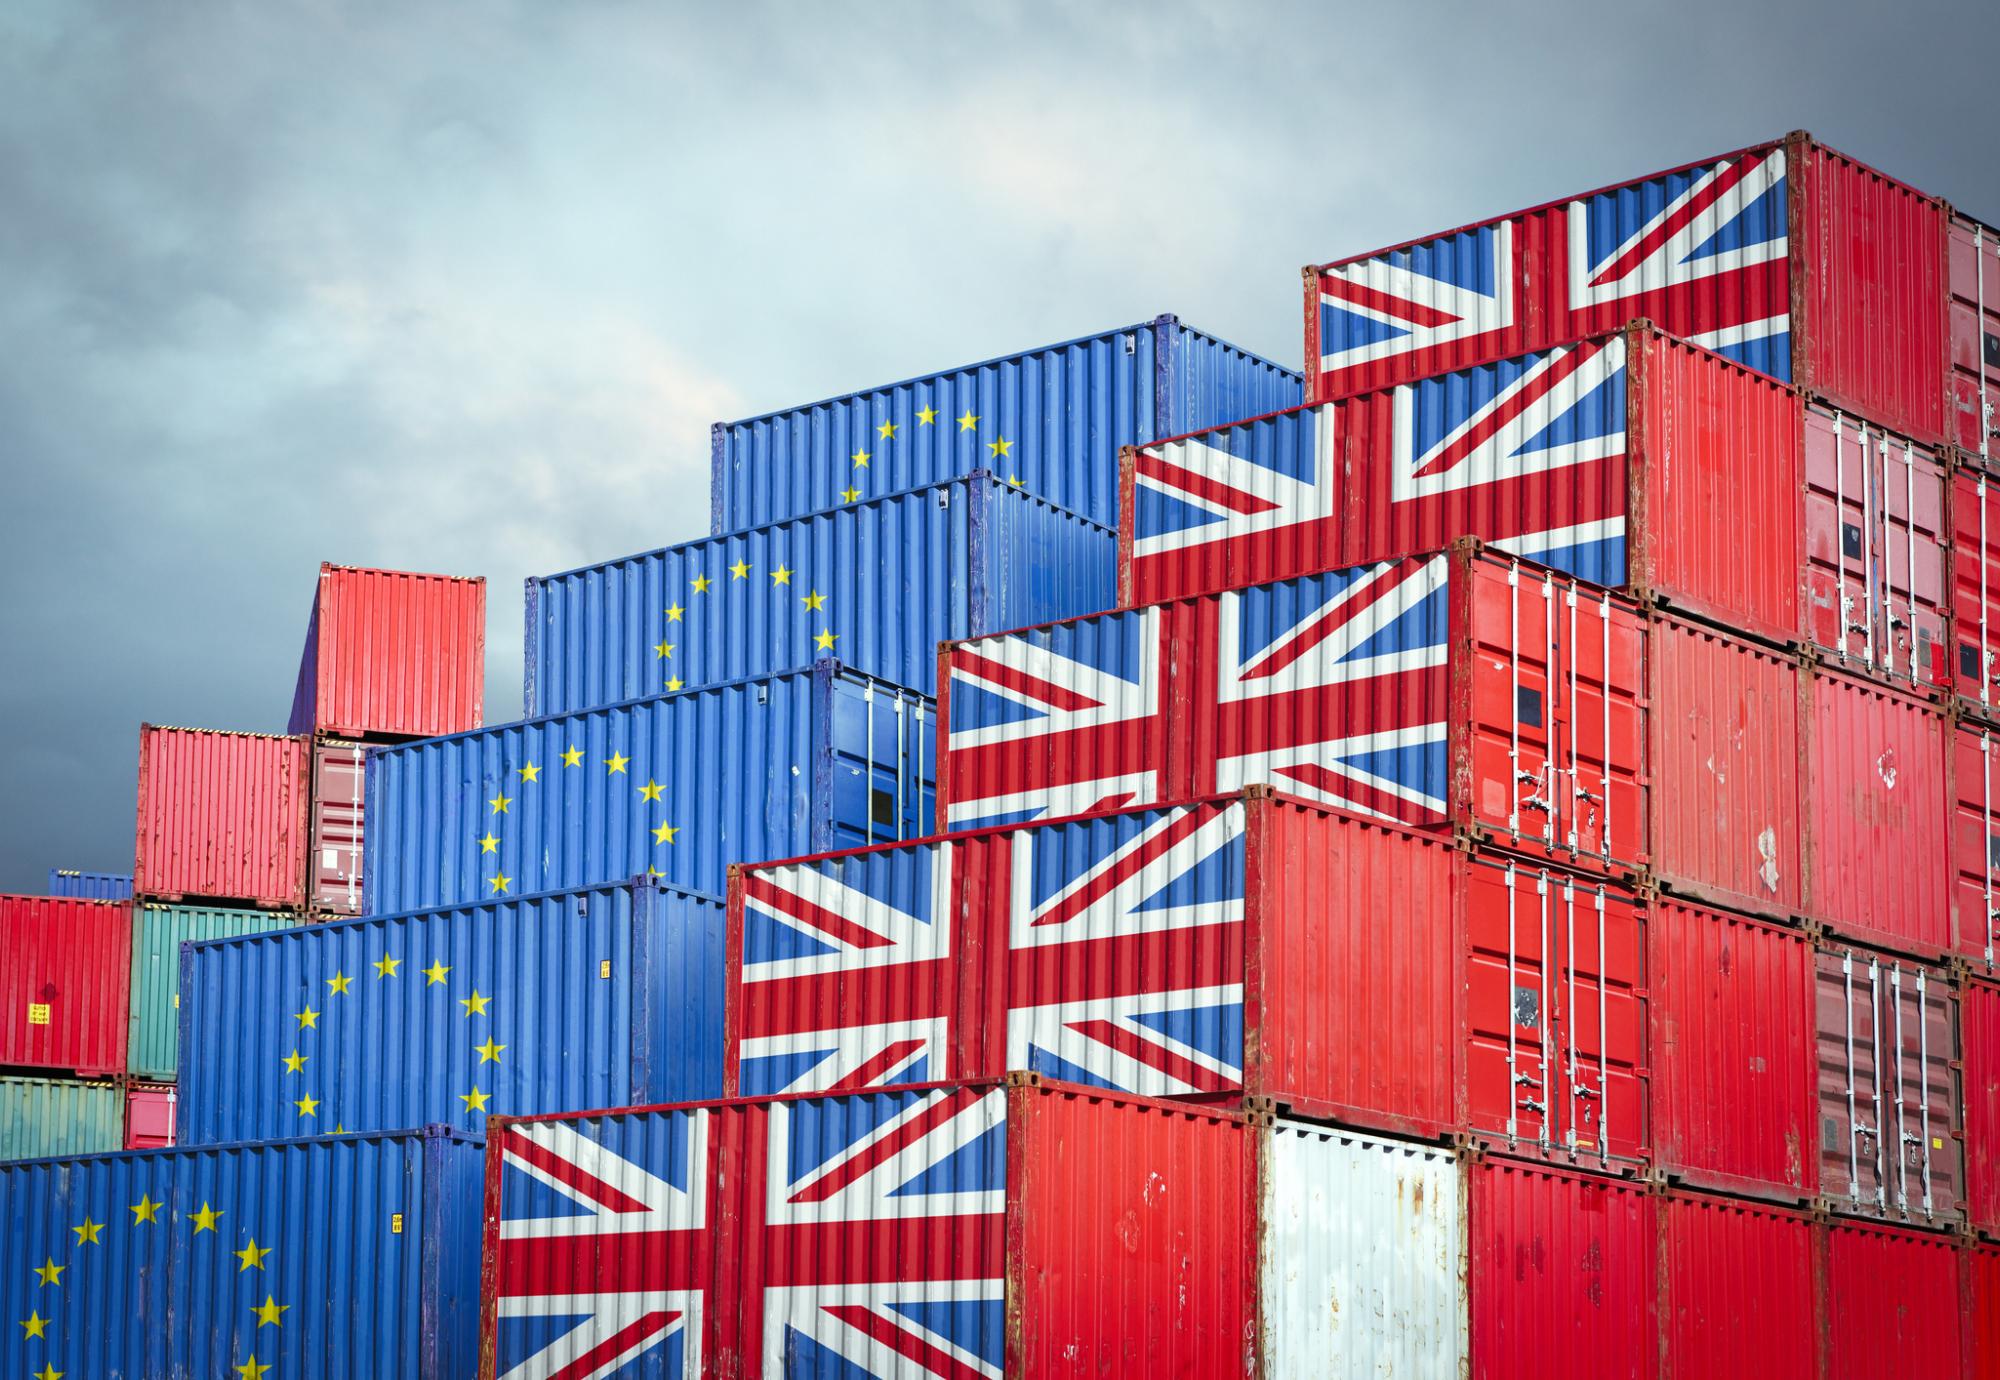 Storage containers representing EU and UK imports and exports.